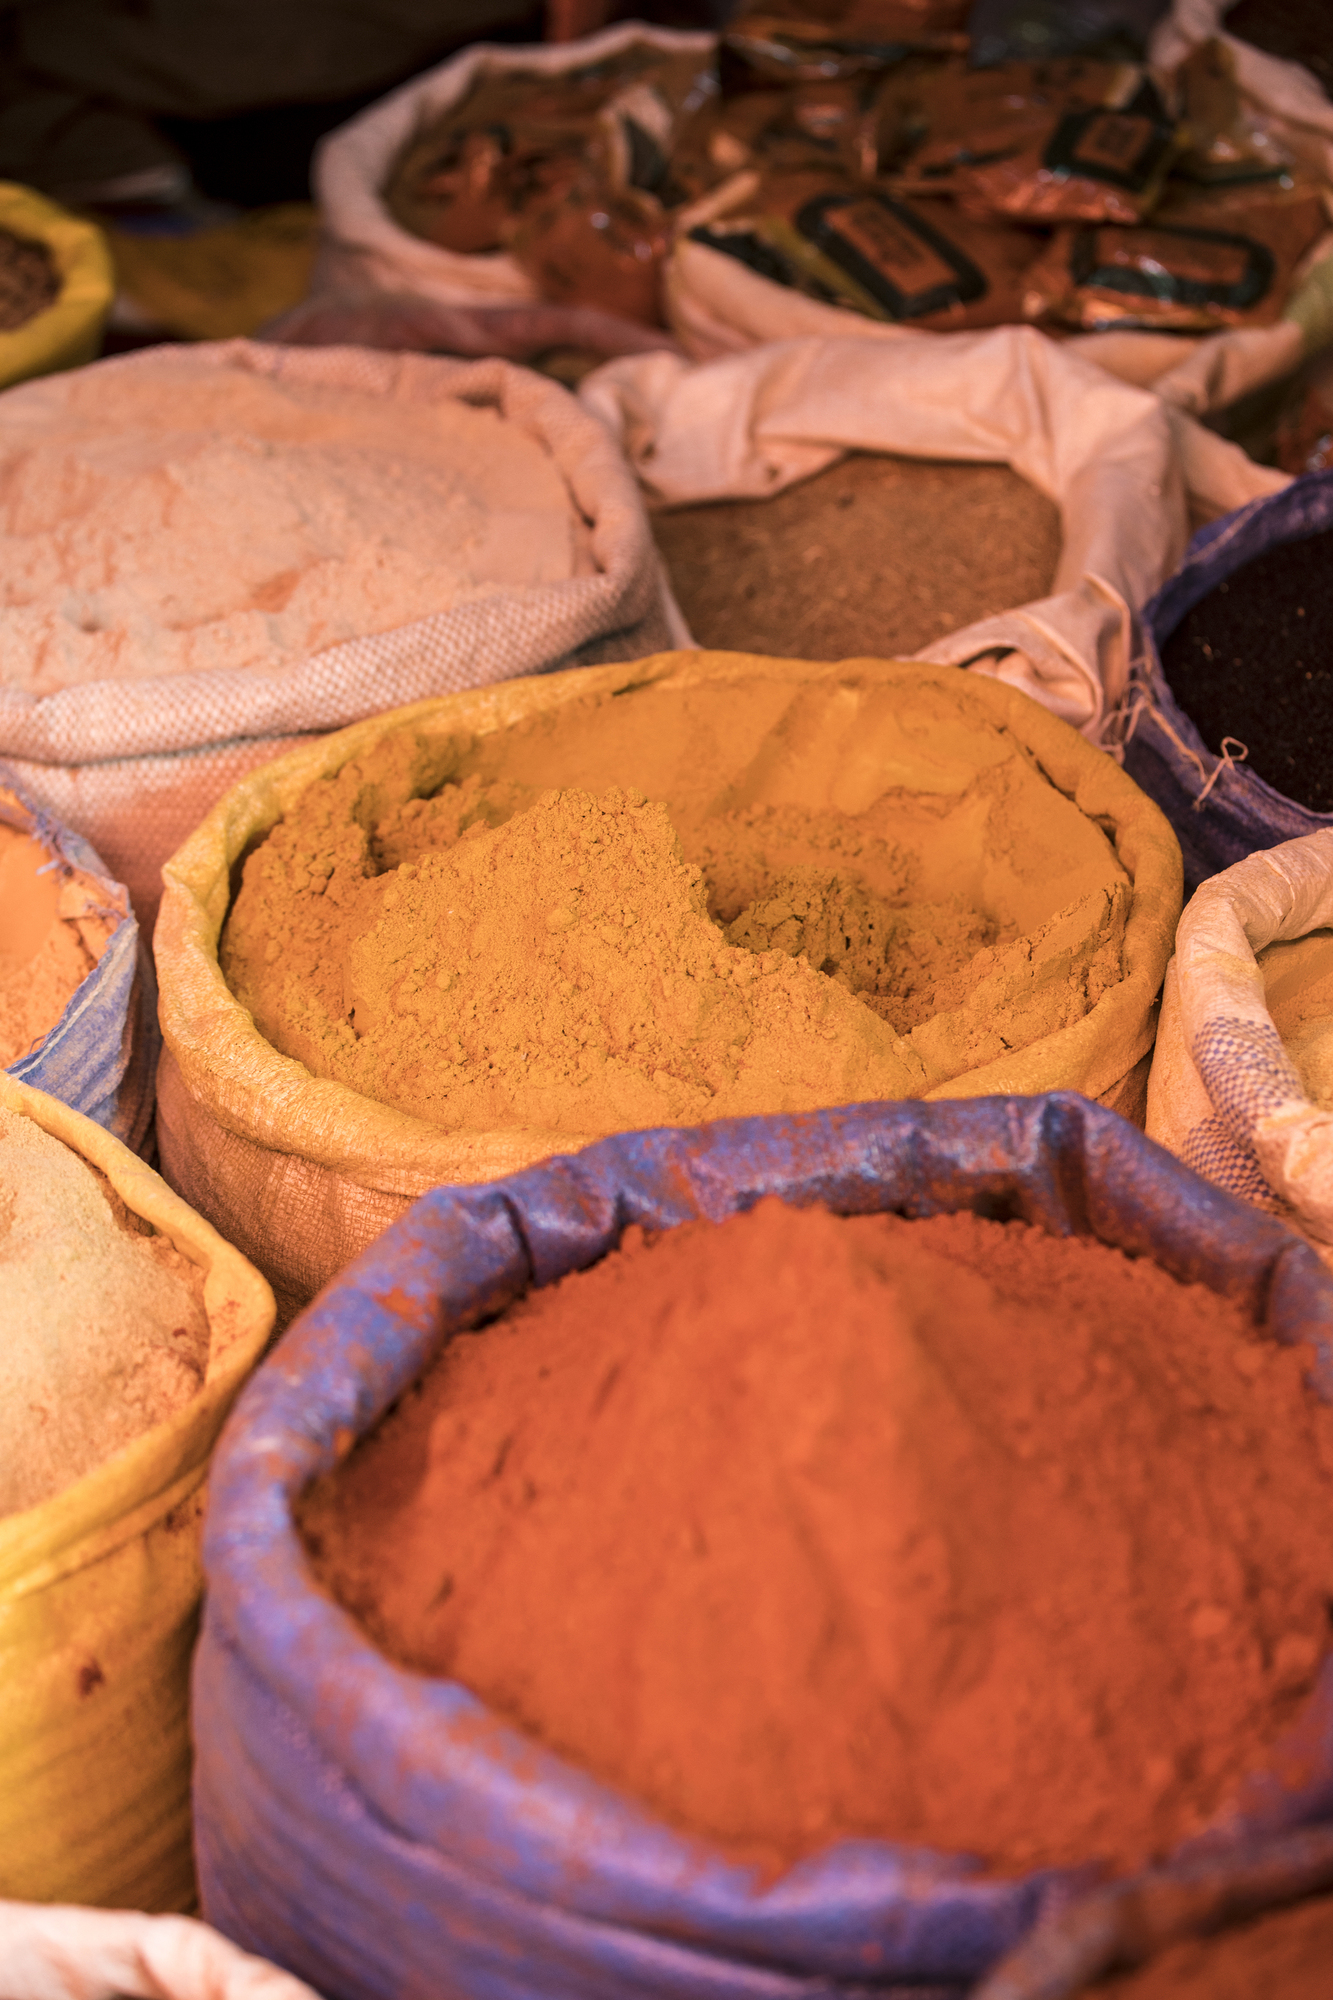 Berbere spice other spices in a market in Ethiopia